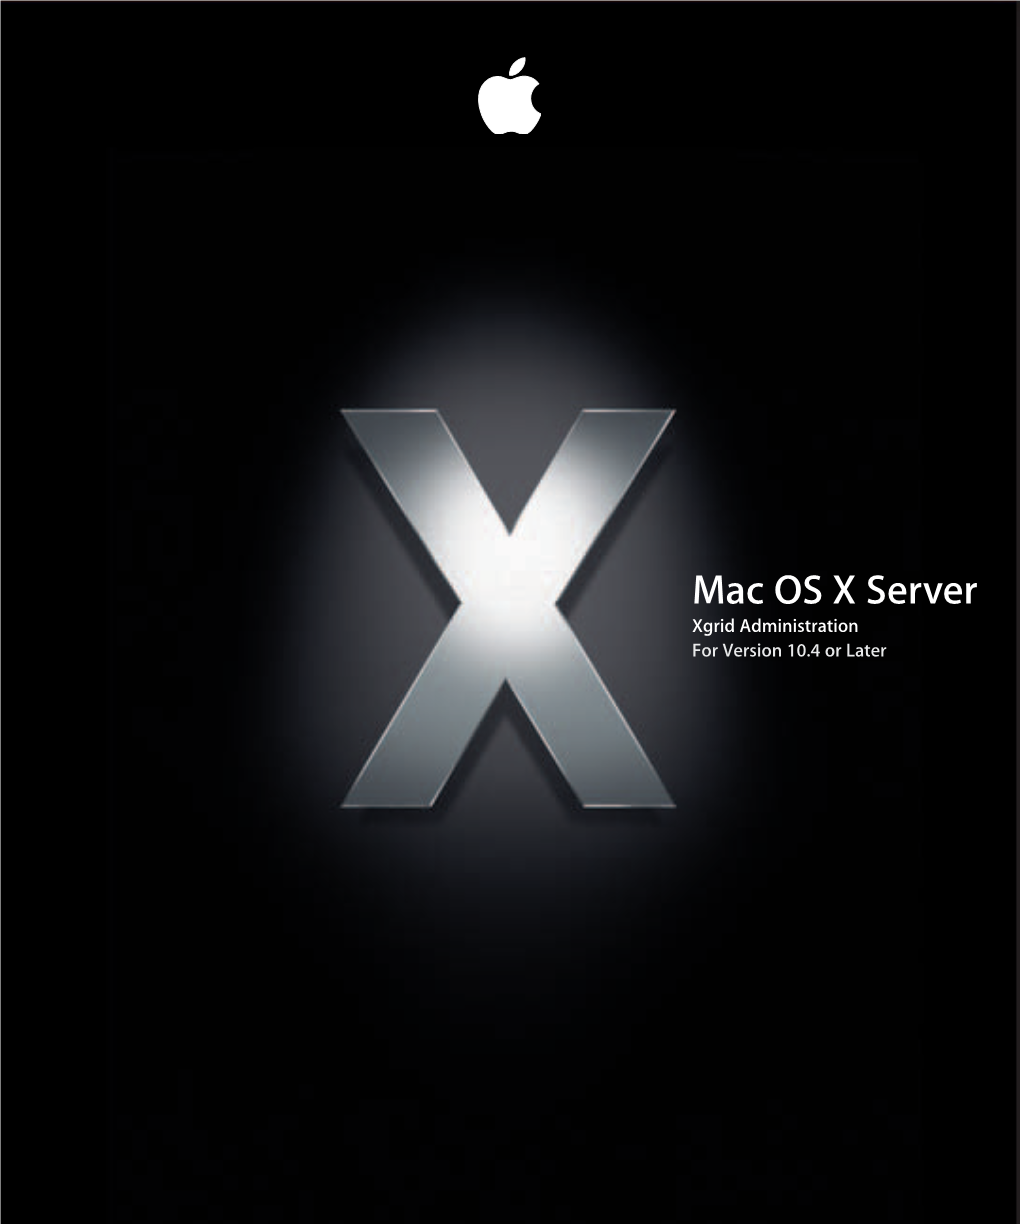 Mac OS X Server Xgrid Administration for Version 10.4 Or Later